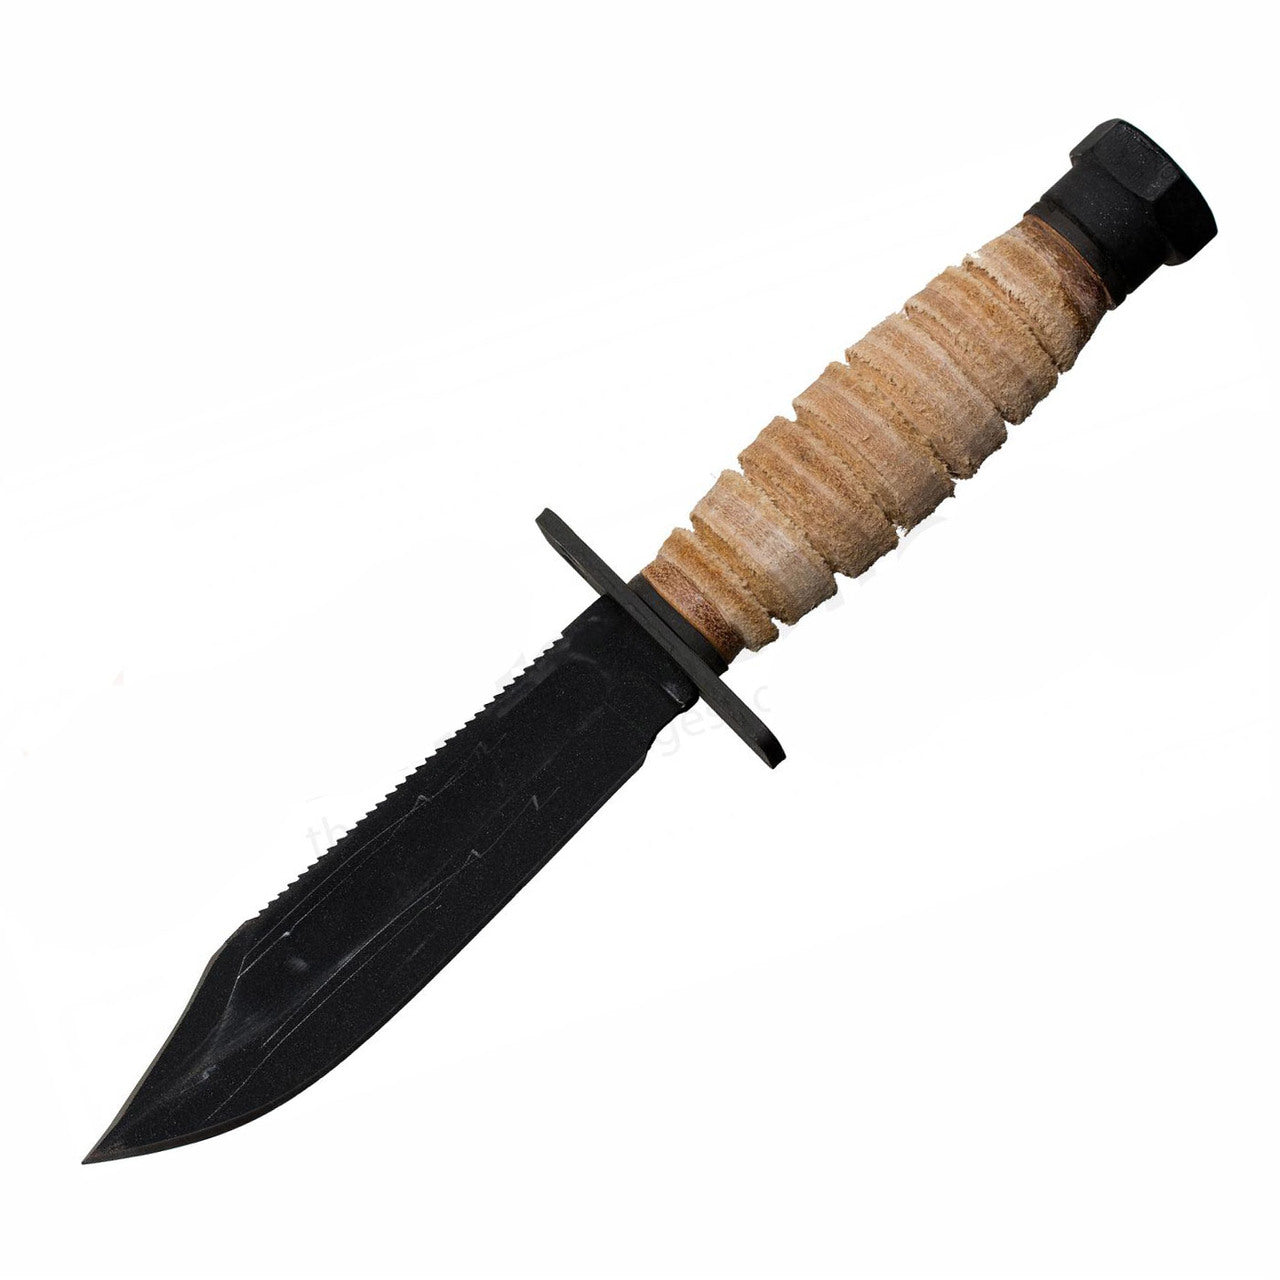 Ontario 499 Air Force Survival Knife, 6150